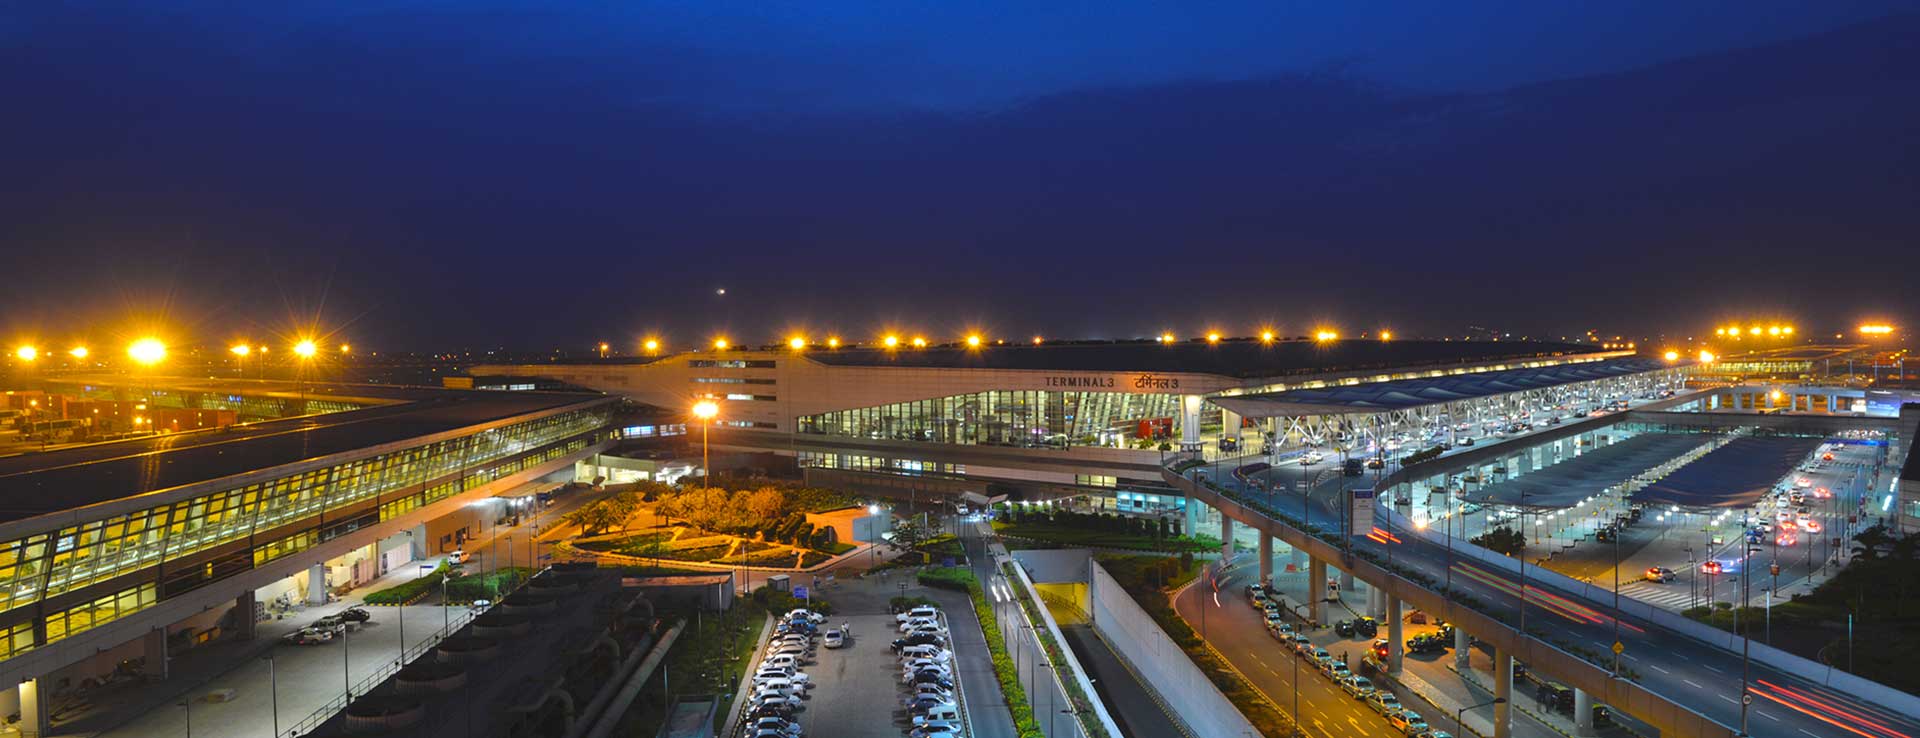 GMR’s Delhi Airport to become Net Zero Carbon Emission Airport by 2030-First Airport in Asia Pacific Region to achieve Level 4+ Accreditation under Airport Carbon Accreditation of ACI